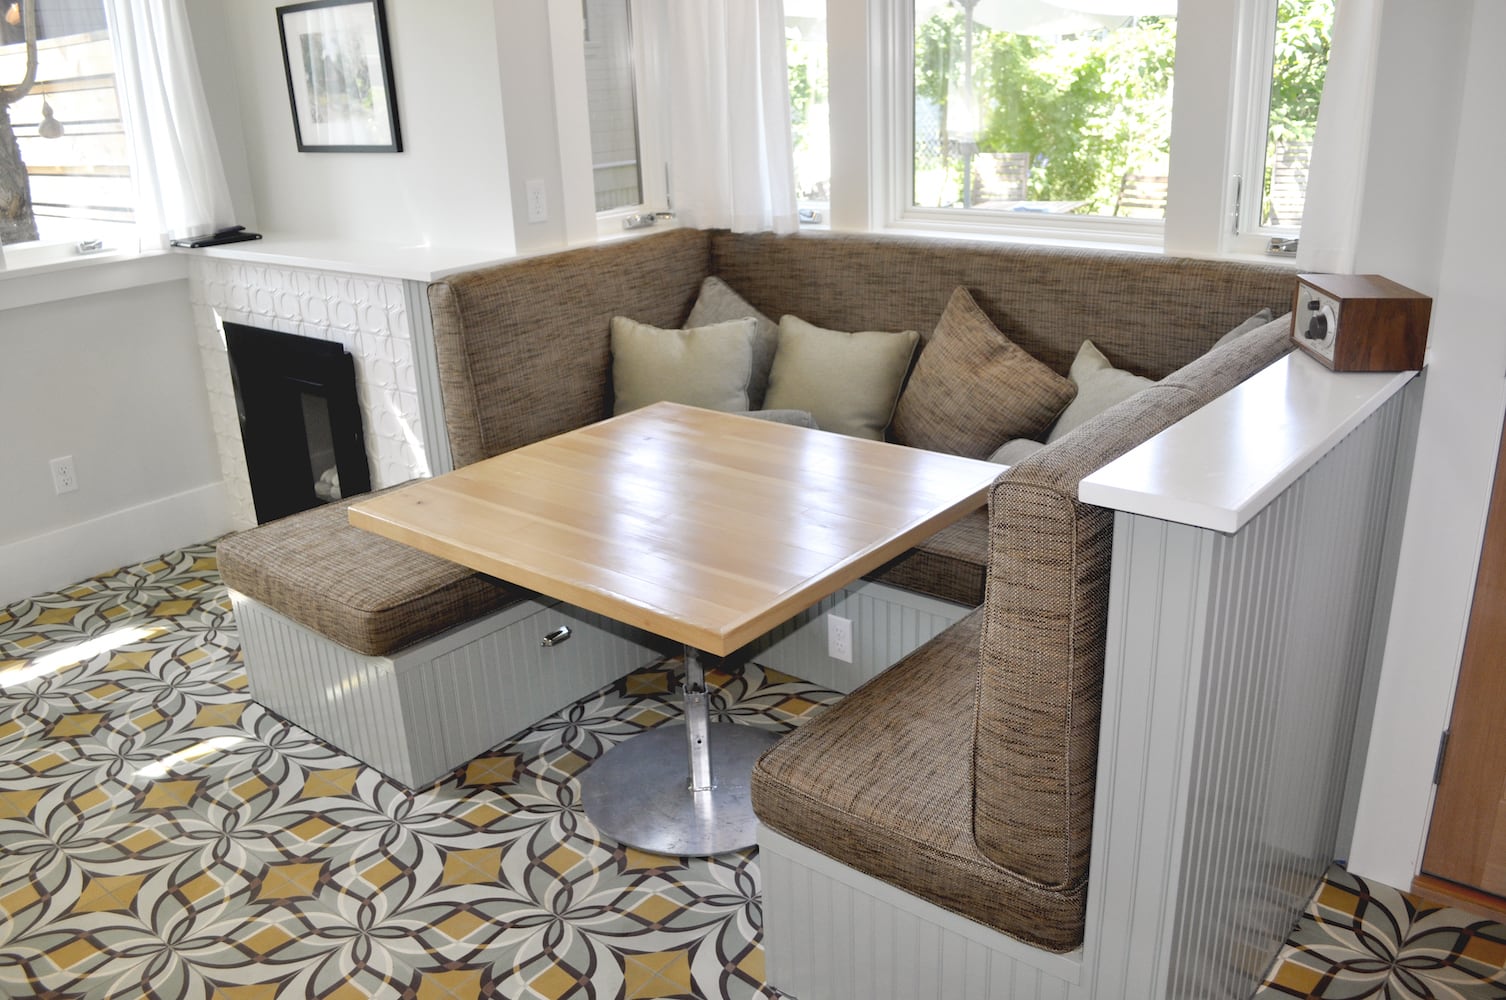 Built-in couch that becomes a dining nook when a small square table is added